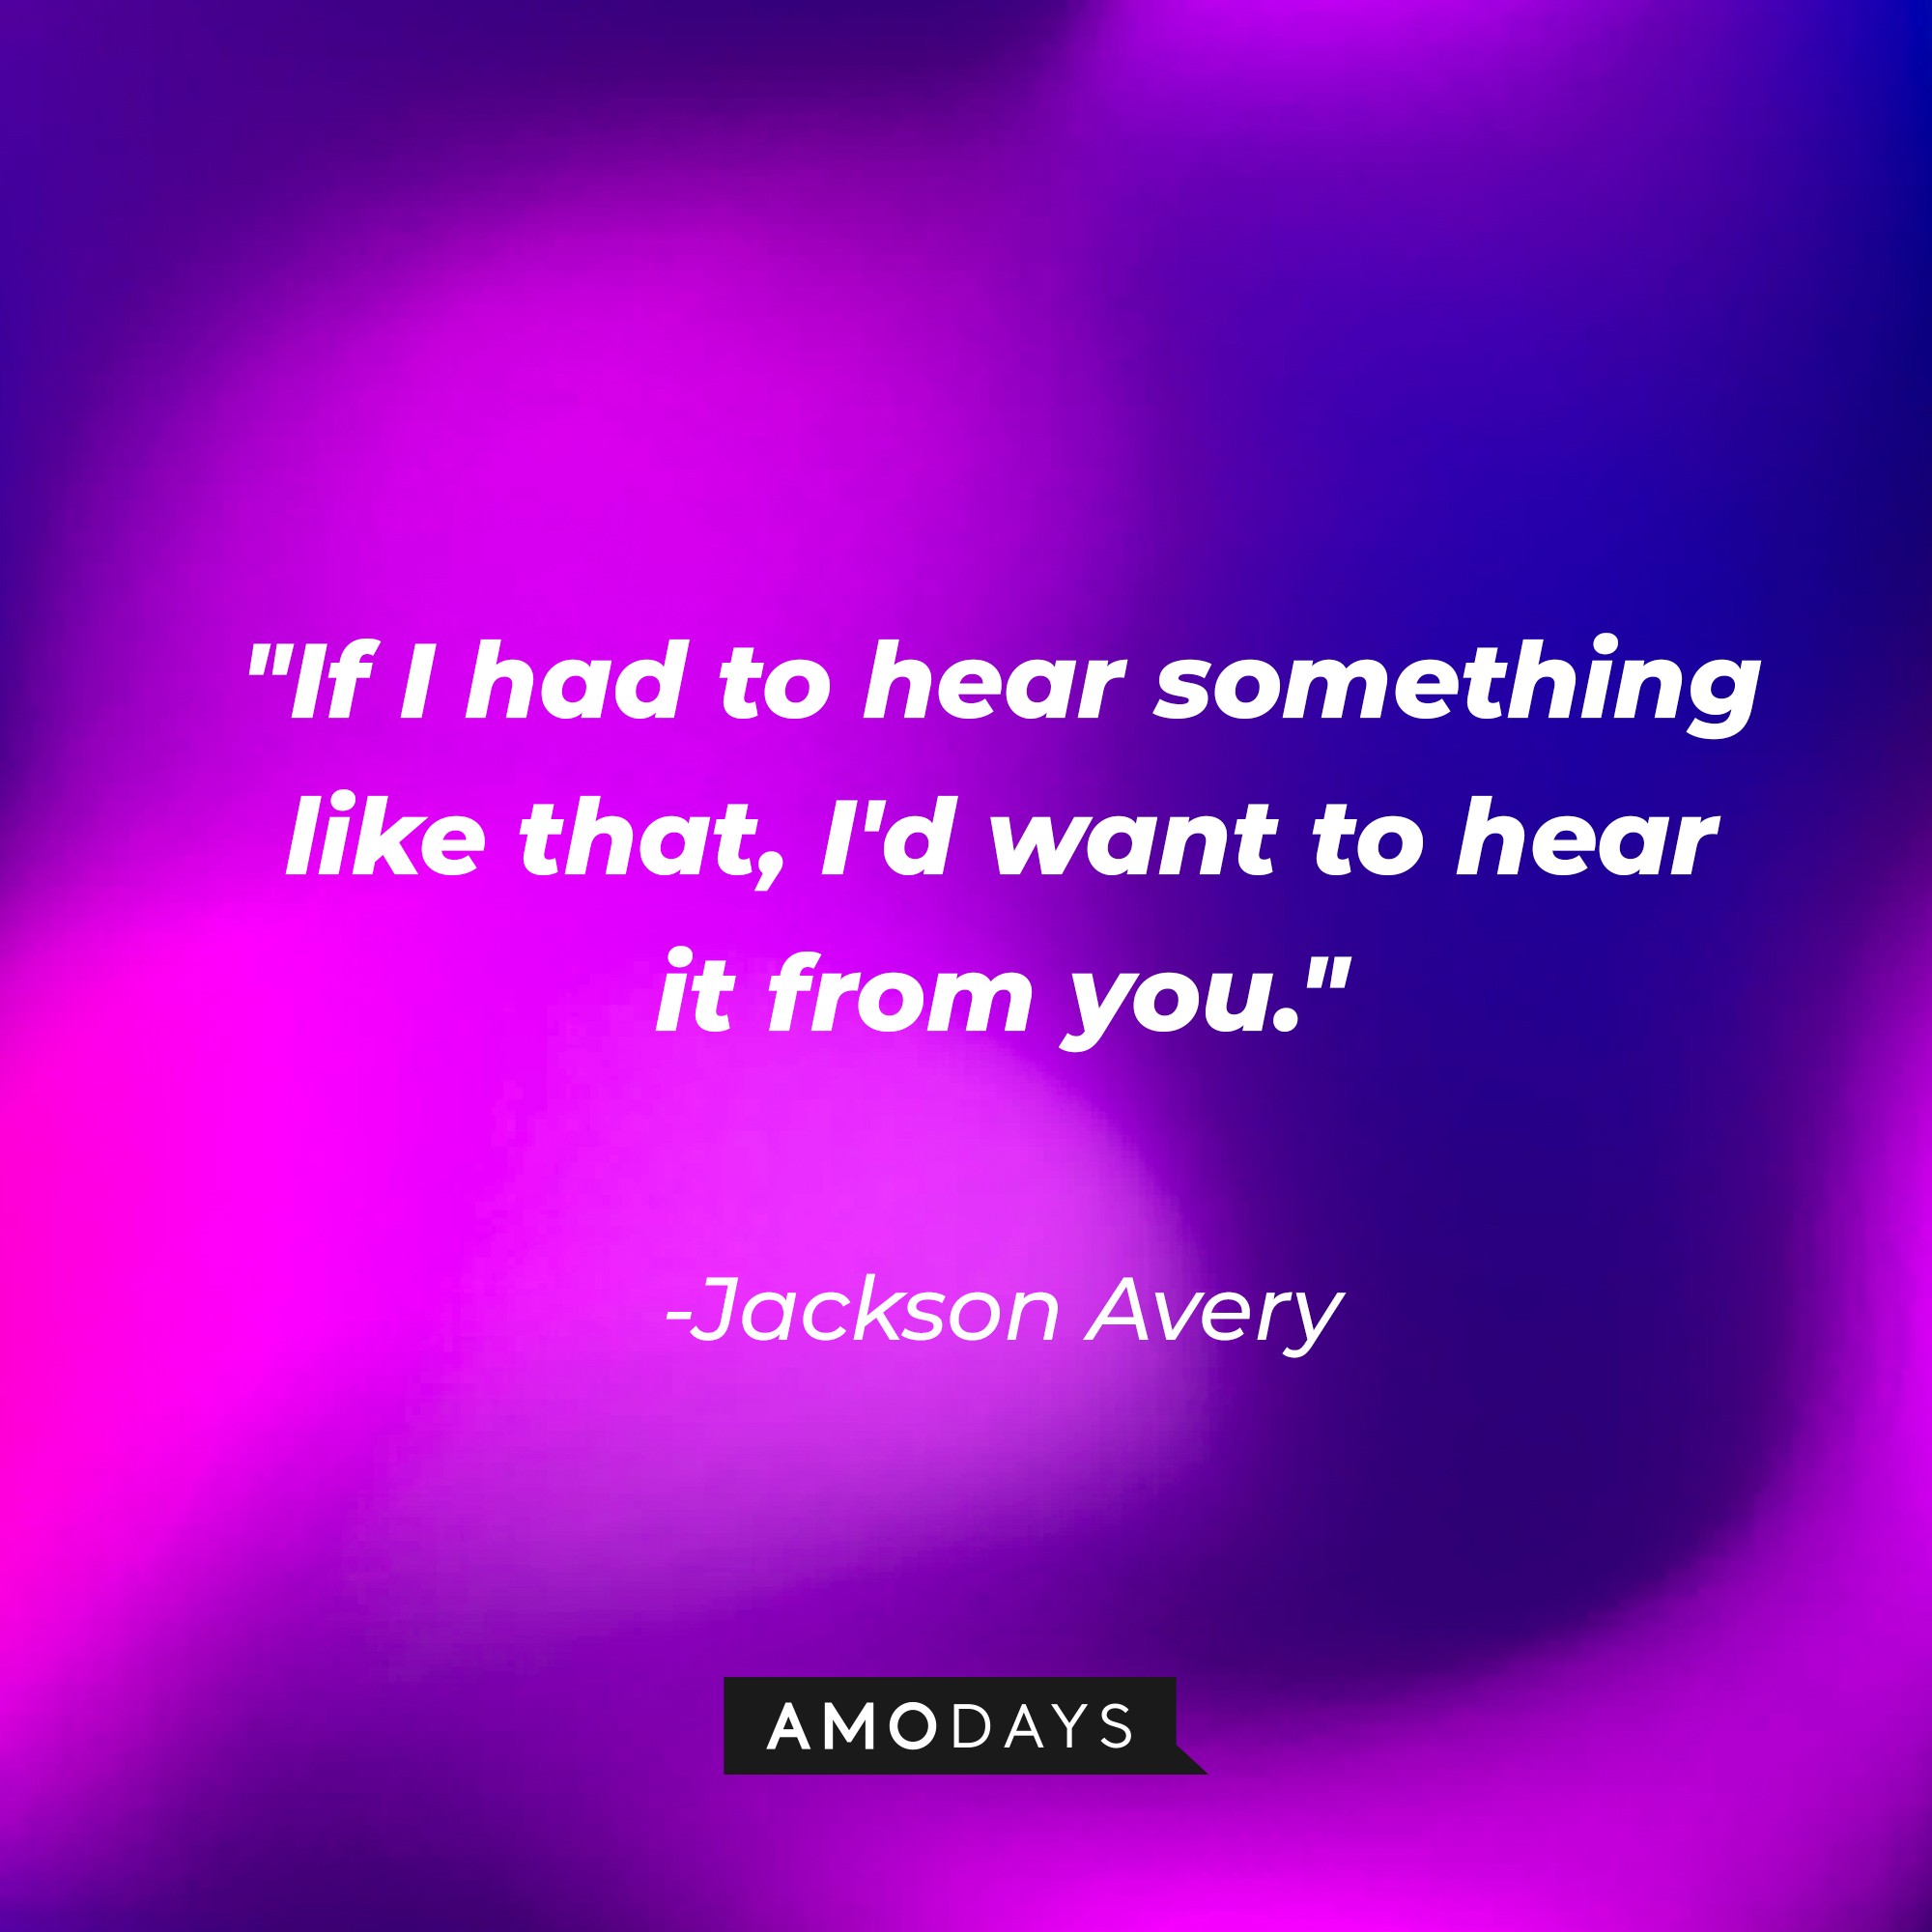 Jackson Avery’s quote: "If I had to hear something like that, I'd want to hear it from you." |Source: AmoDays